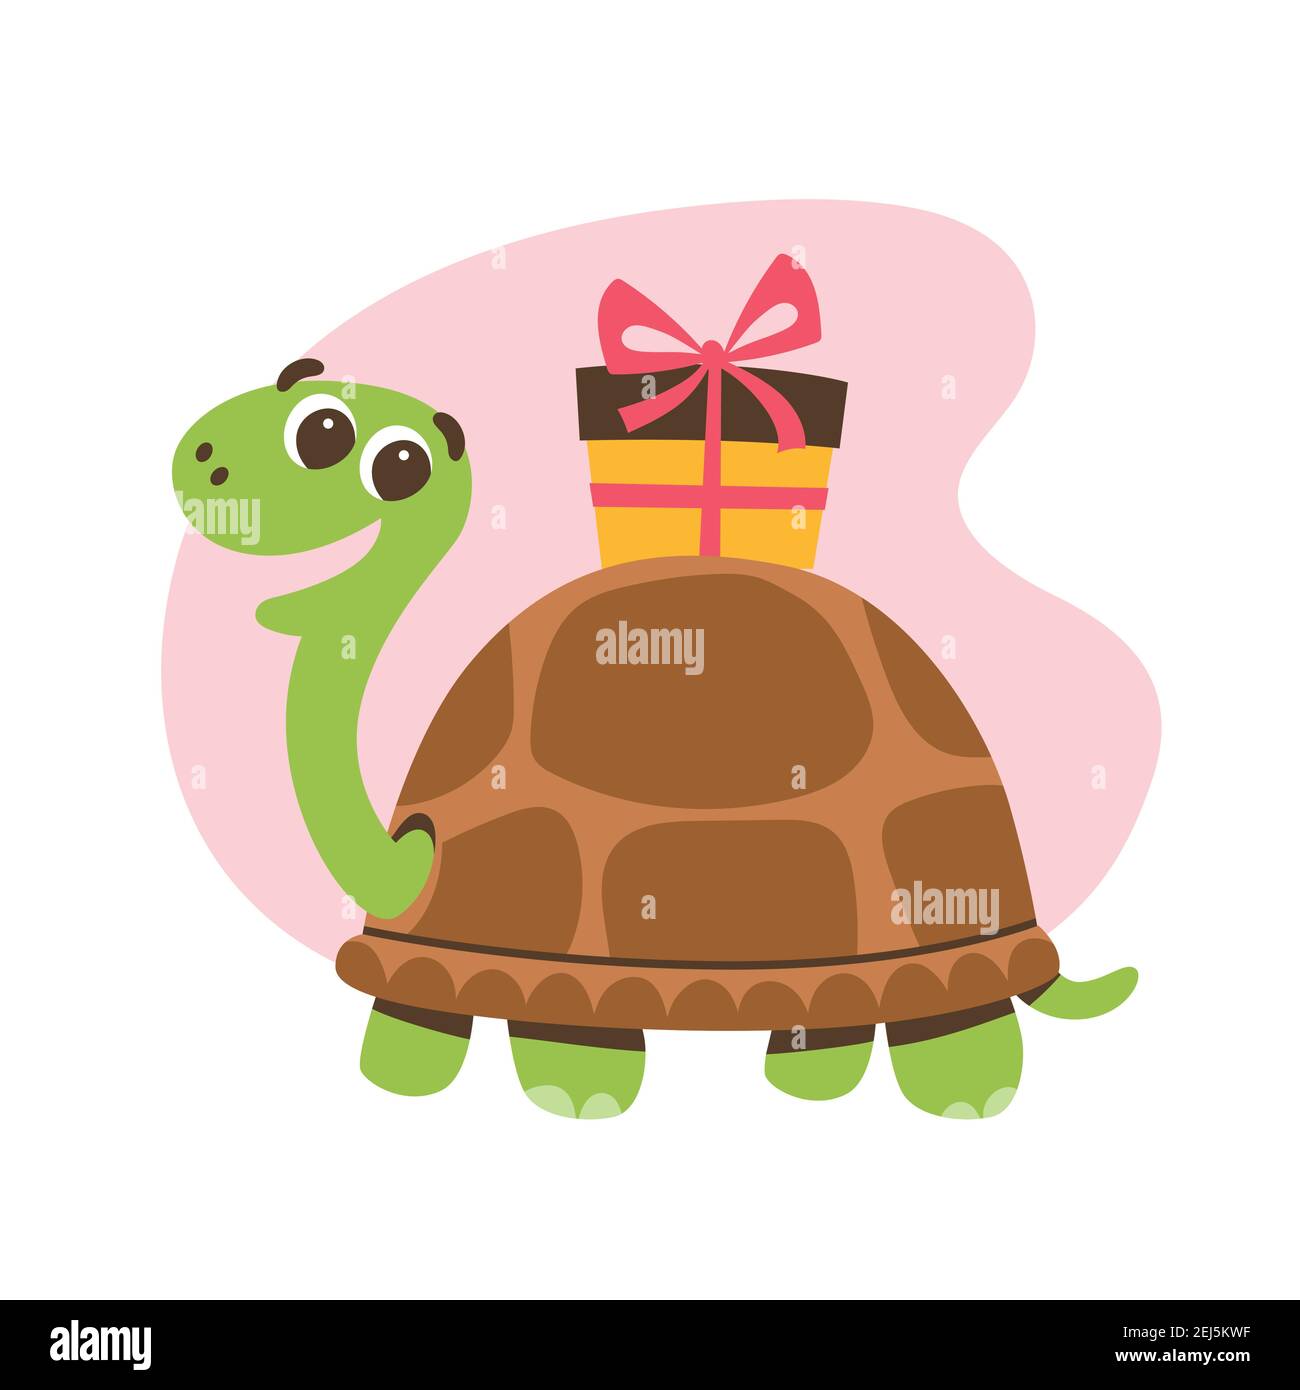 Cute smiling turtle with a gift on its shell. Love and friendship concept. Cute sticker for kids. Cartoon vector illustration. Stock Vector